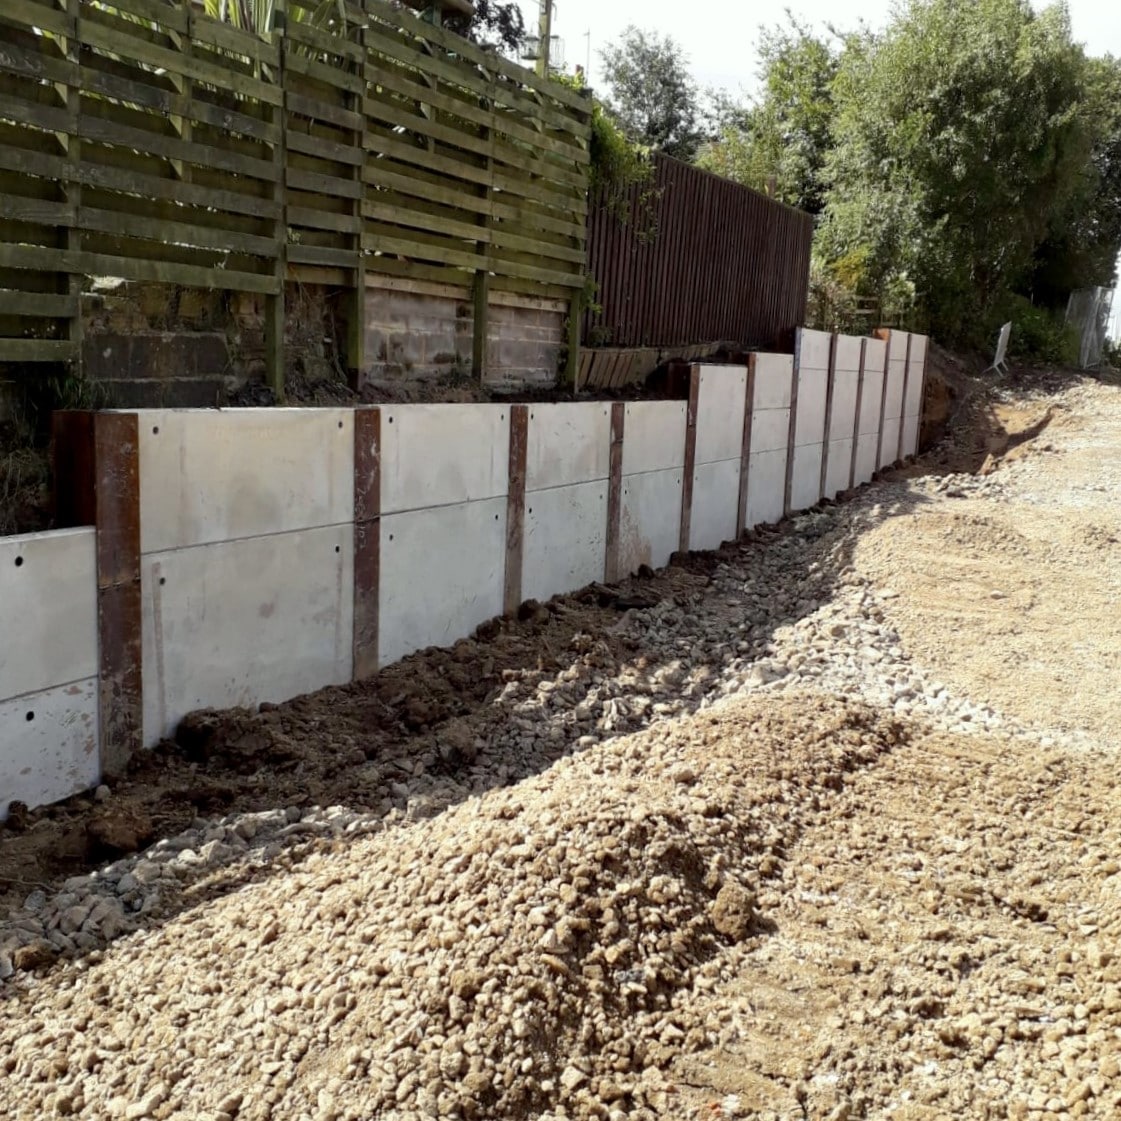 King Post Wall for a residential development in Pudsey